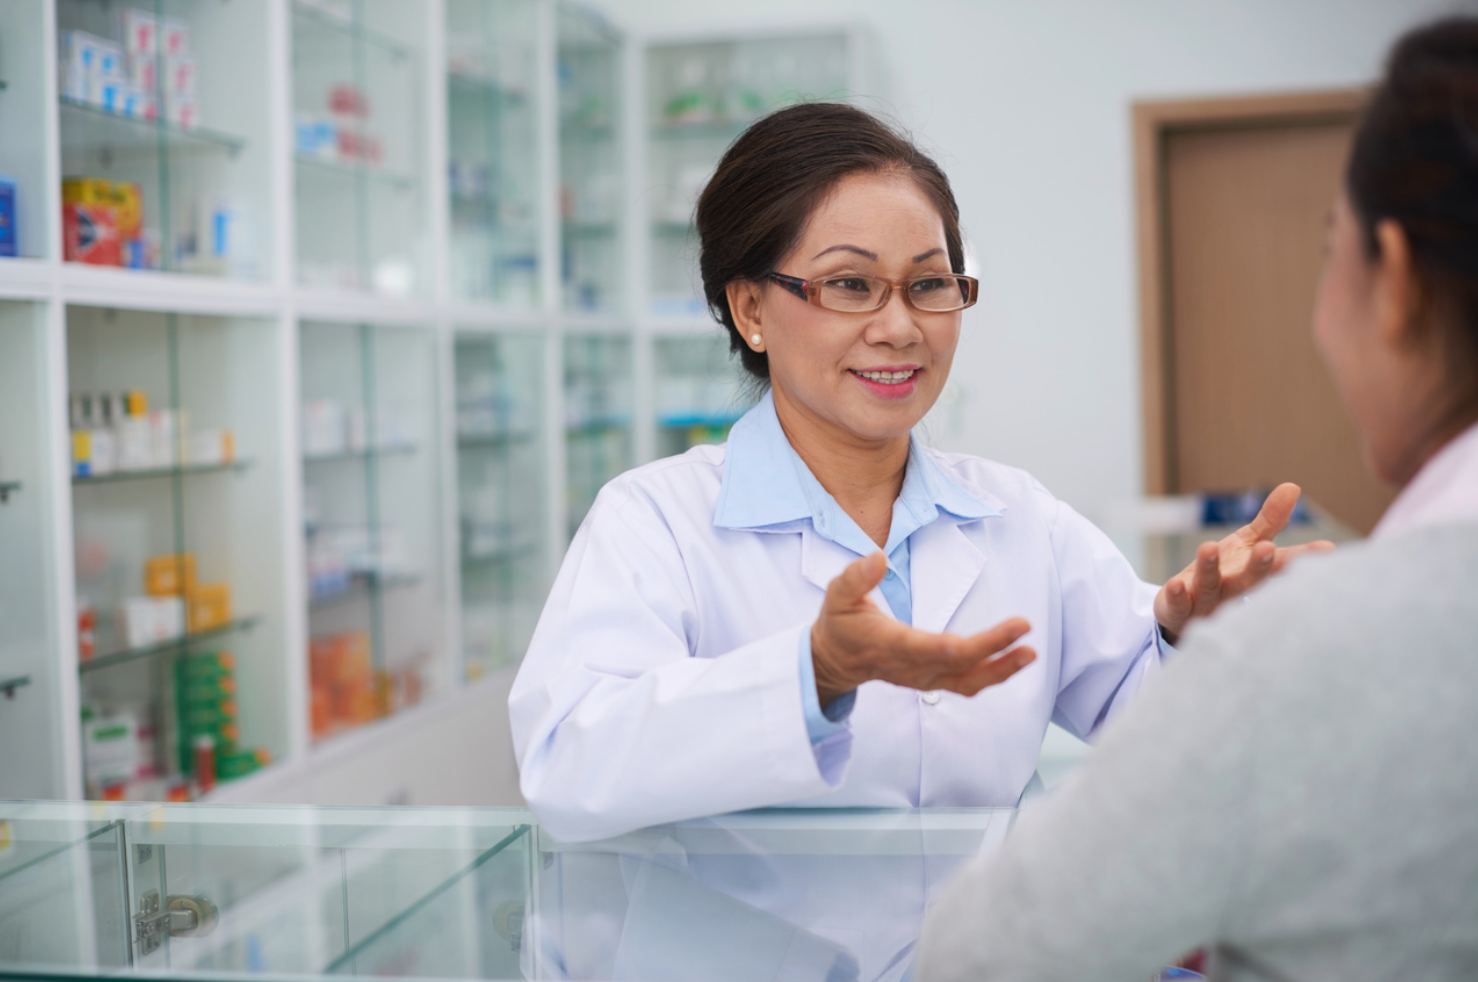 Ohio Leads the Way in Pharmacy Reform, Will Other States Follow?